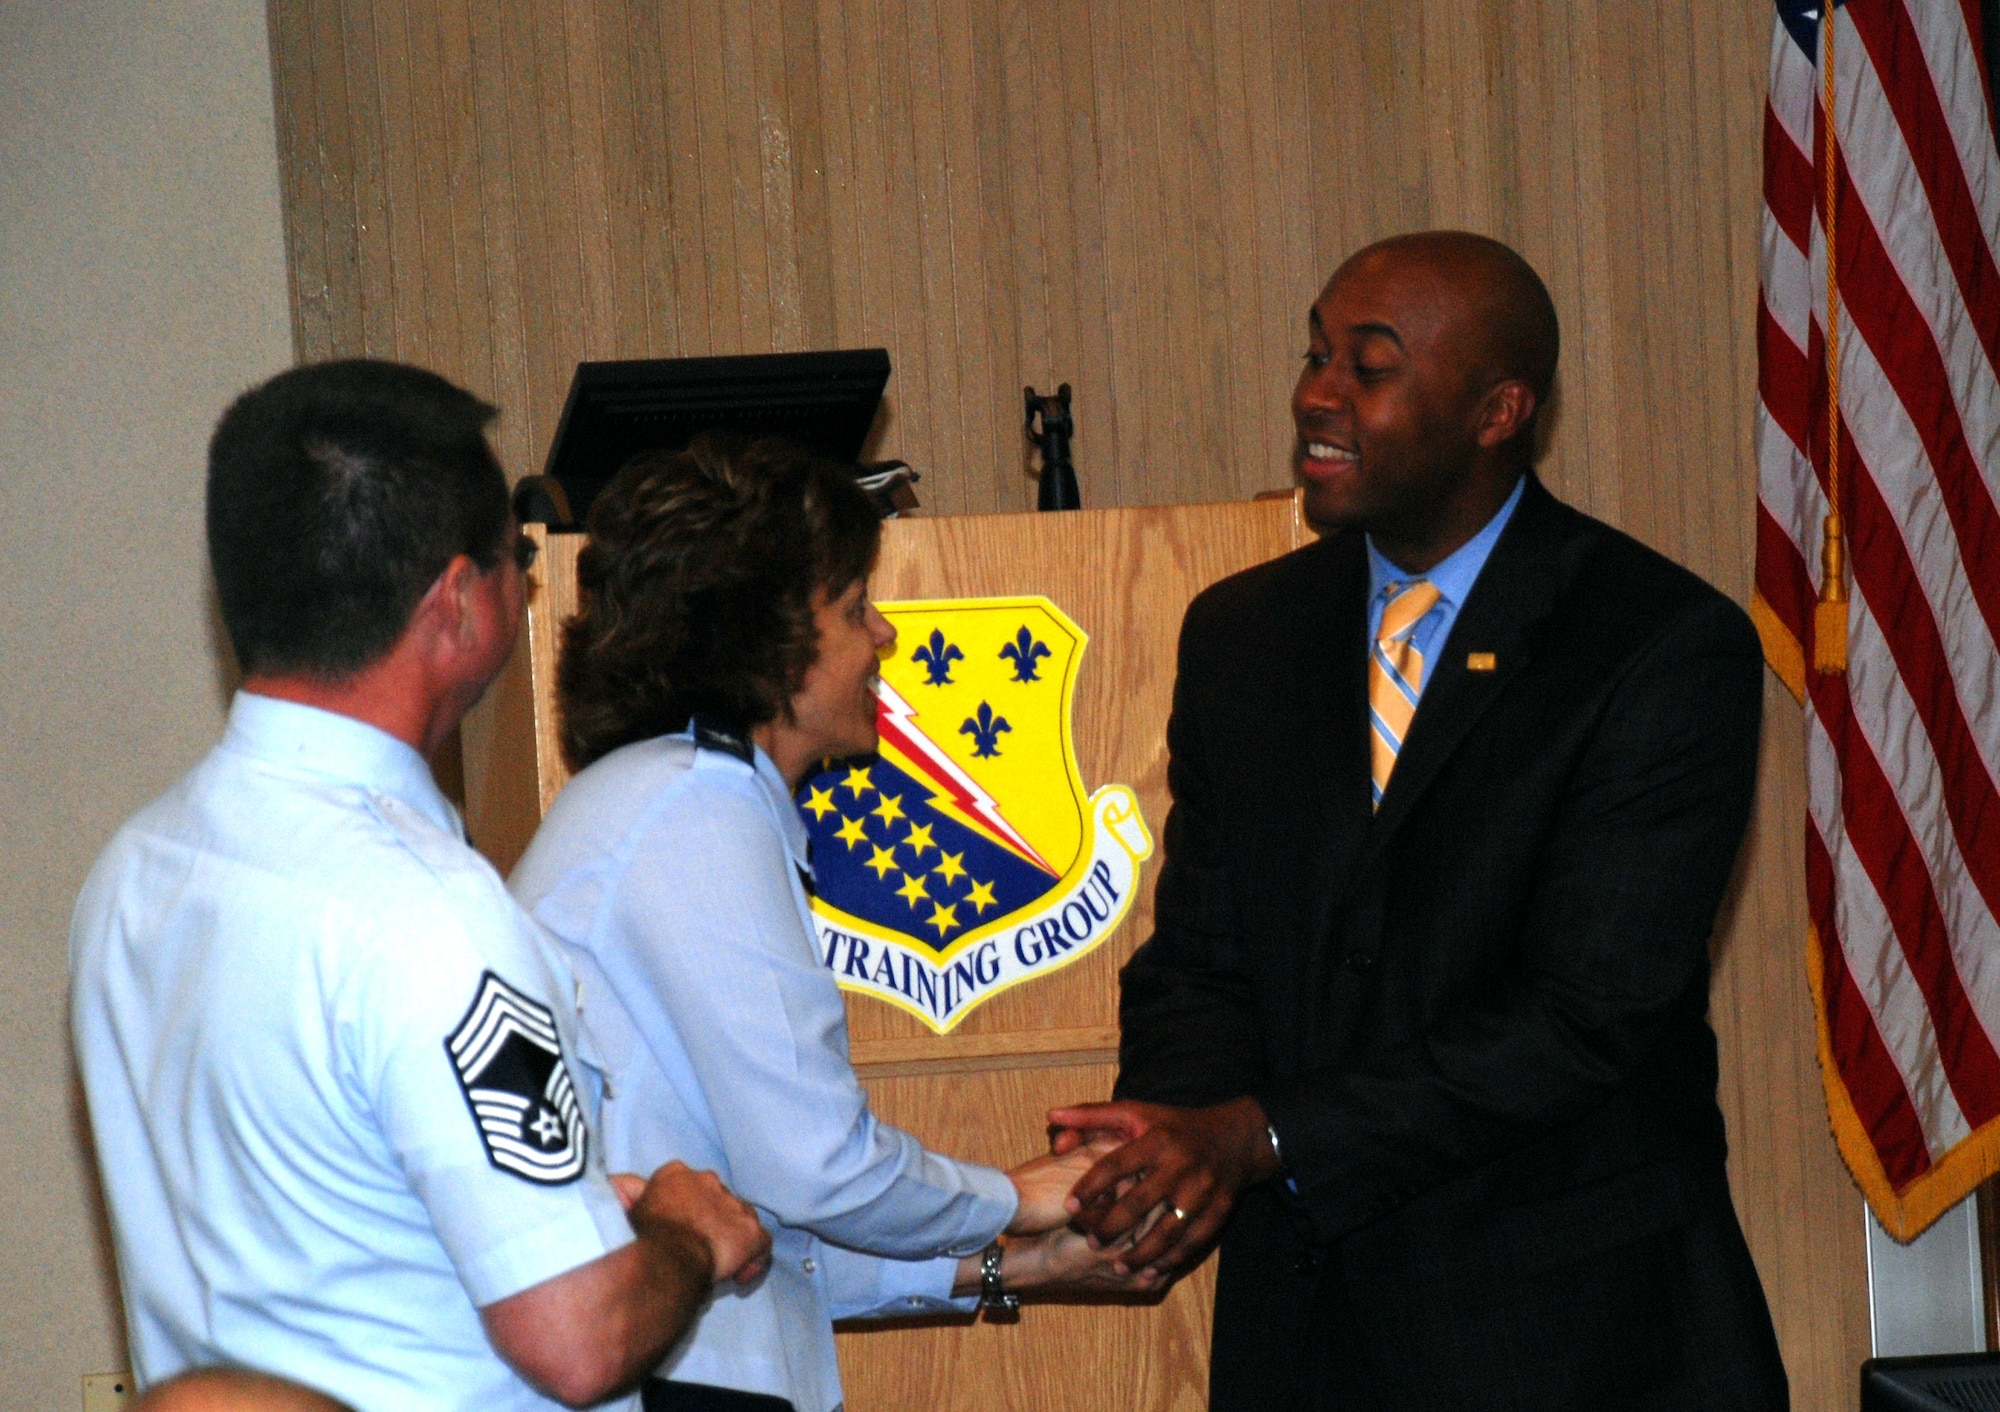 Chief Master Sergeant Michael Crowley, the project officer for the 882nd Training 
Group, and Col. Nancy Dezell, the group commander, greets Marcel Johnson, the 
vice president of economic development for the San Antonio Chamber of Commerce, 
at a meeting May 6. The San Antonio Chamber of Commerce visited Sheppard to discuss the 882nd TRG's transition to San Antonio. (U.S. Air Force photo/ Airman 1st Class Candy Miller)